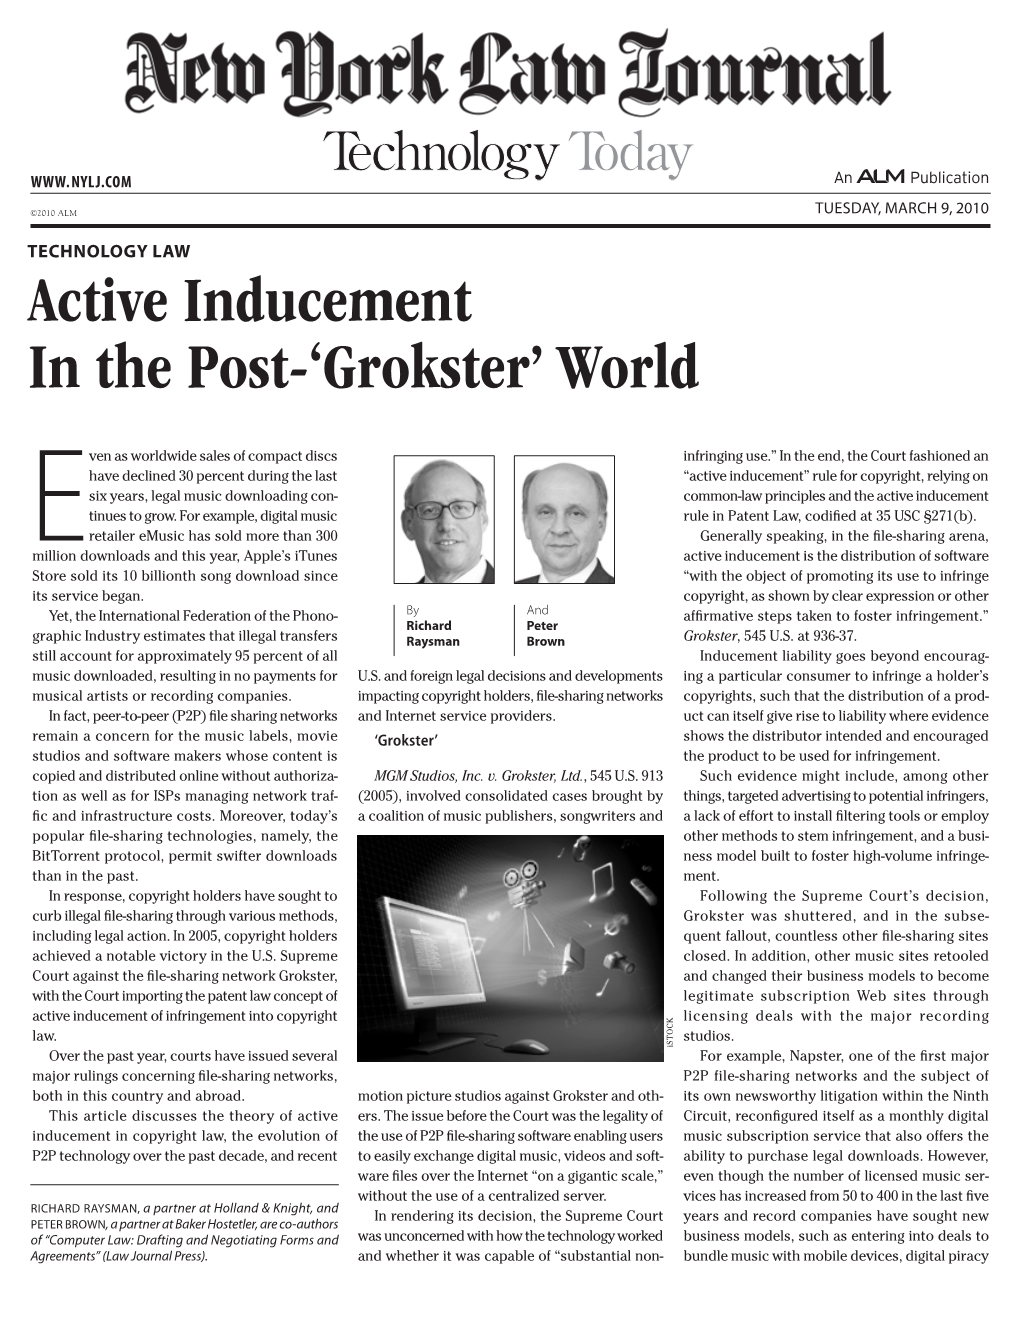 Active Inducement in the Post-'Grokster' World